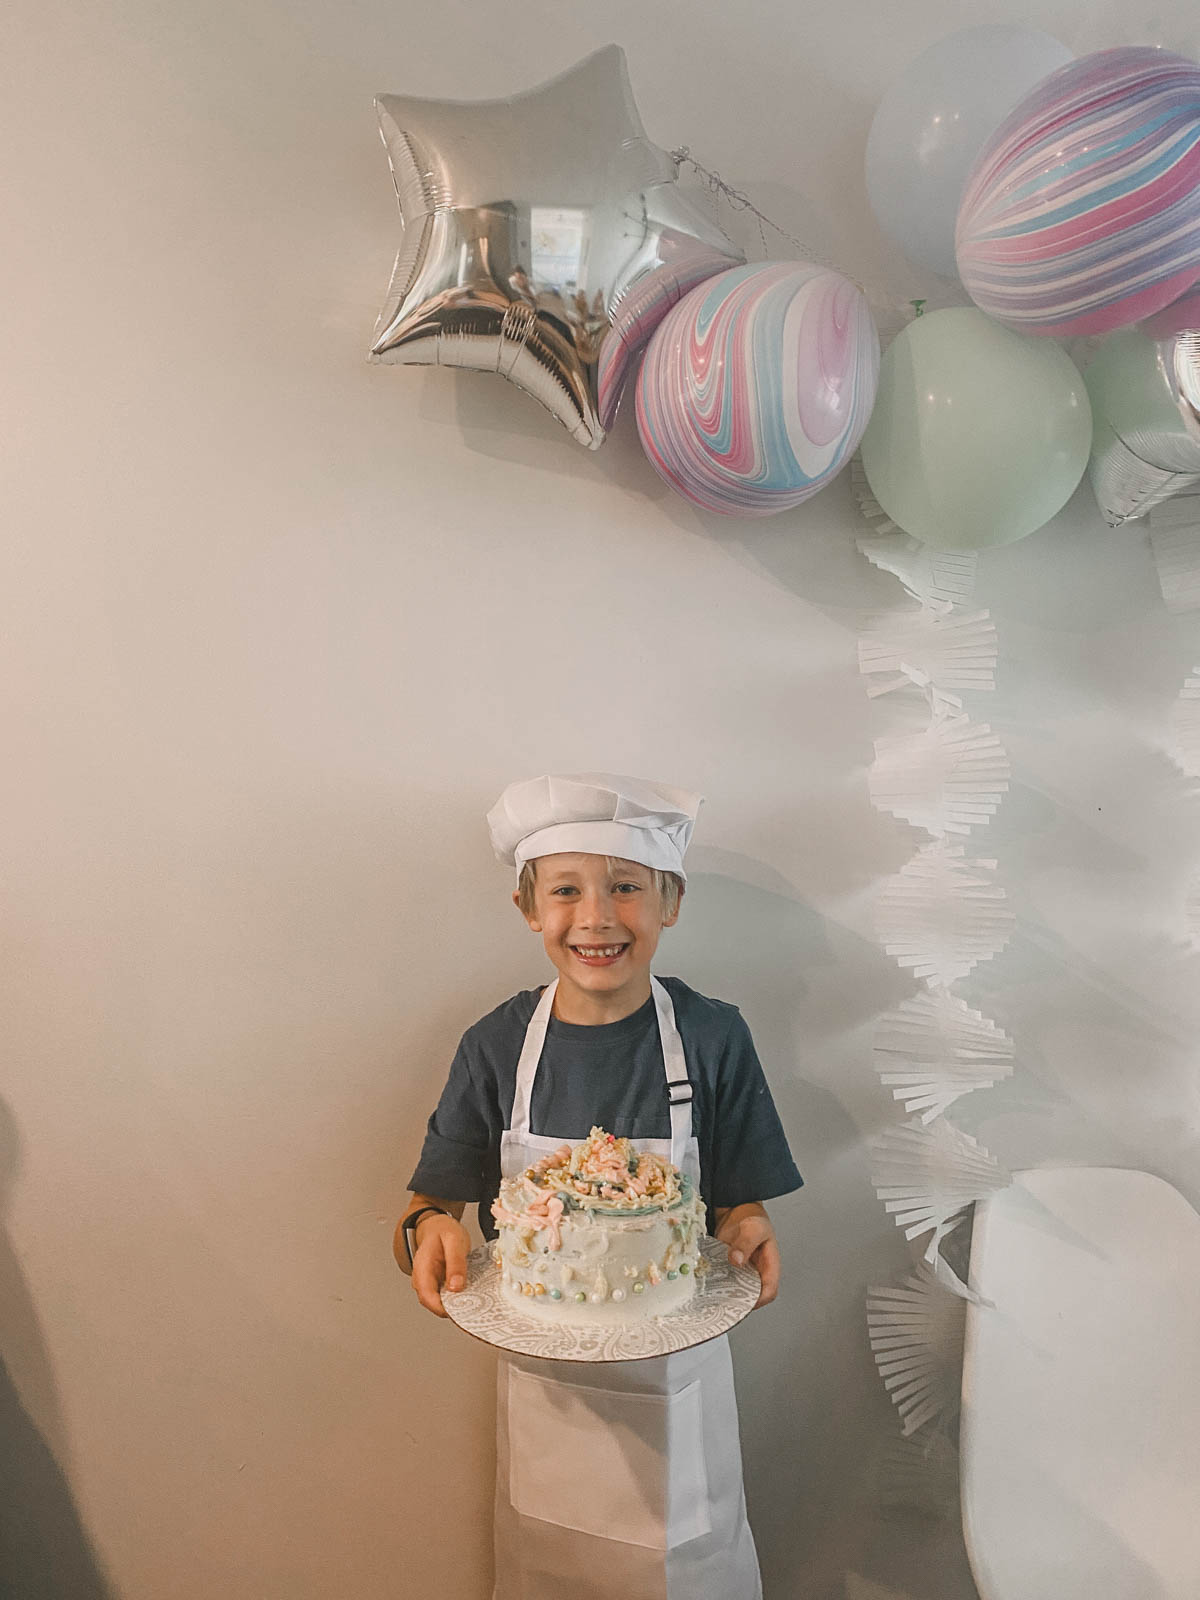 Boy holding a cake he decorated at a cake decorating party wearing an apron and chefs hat